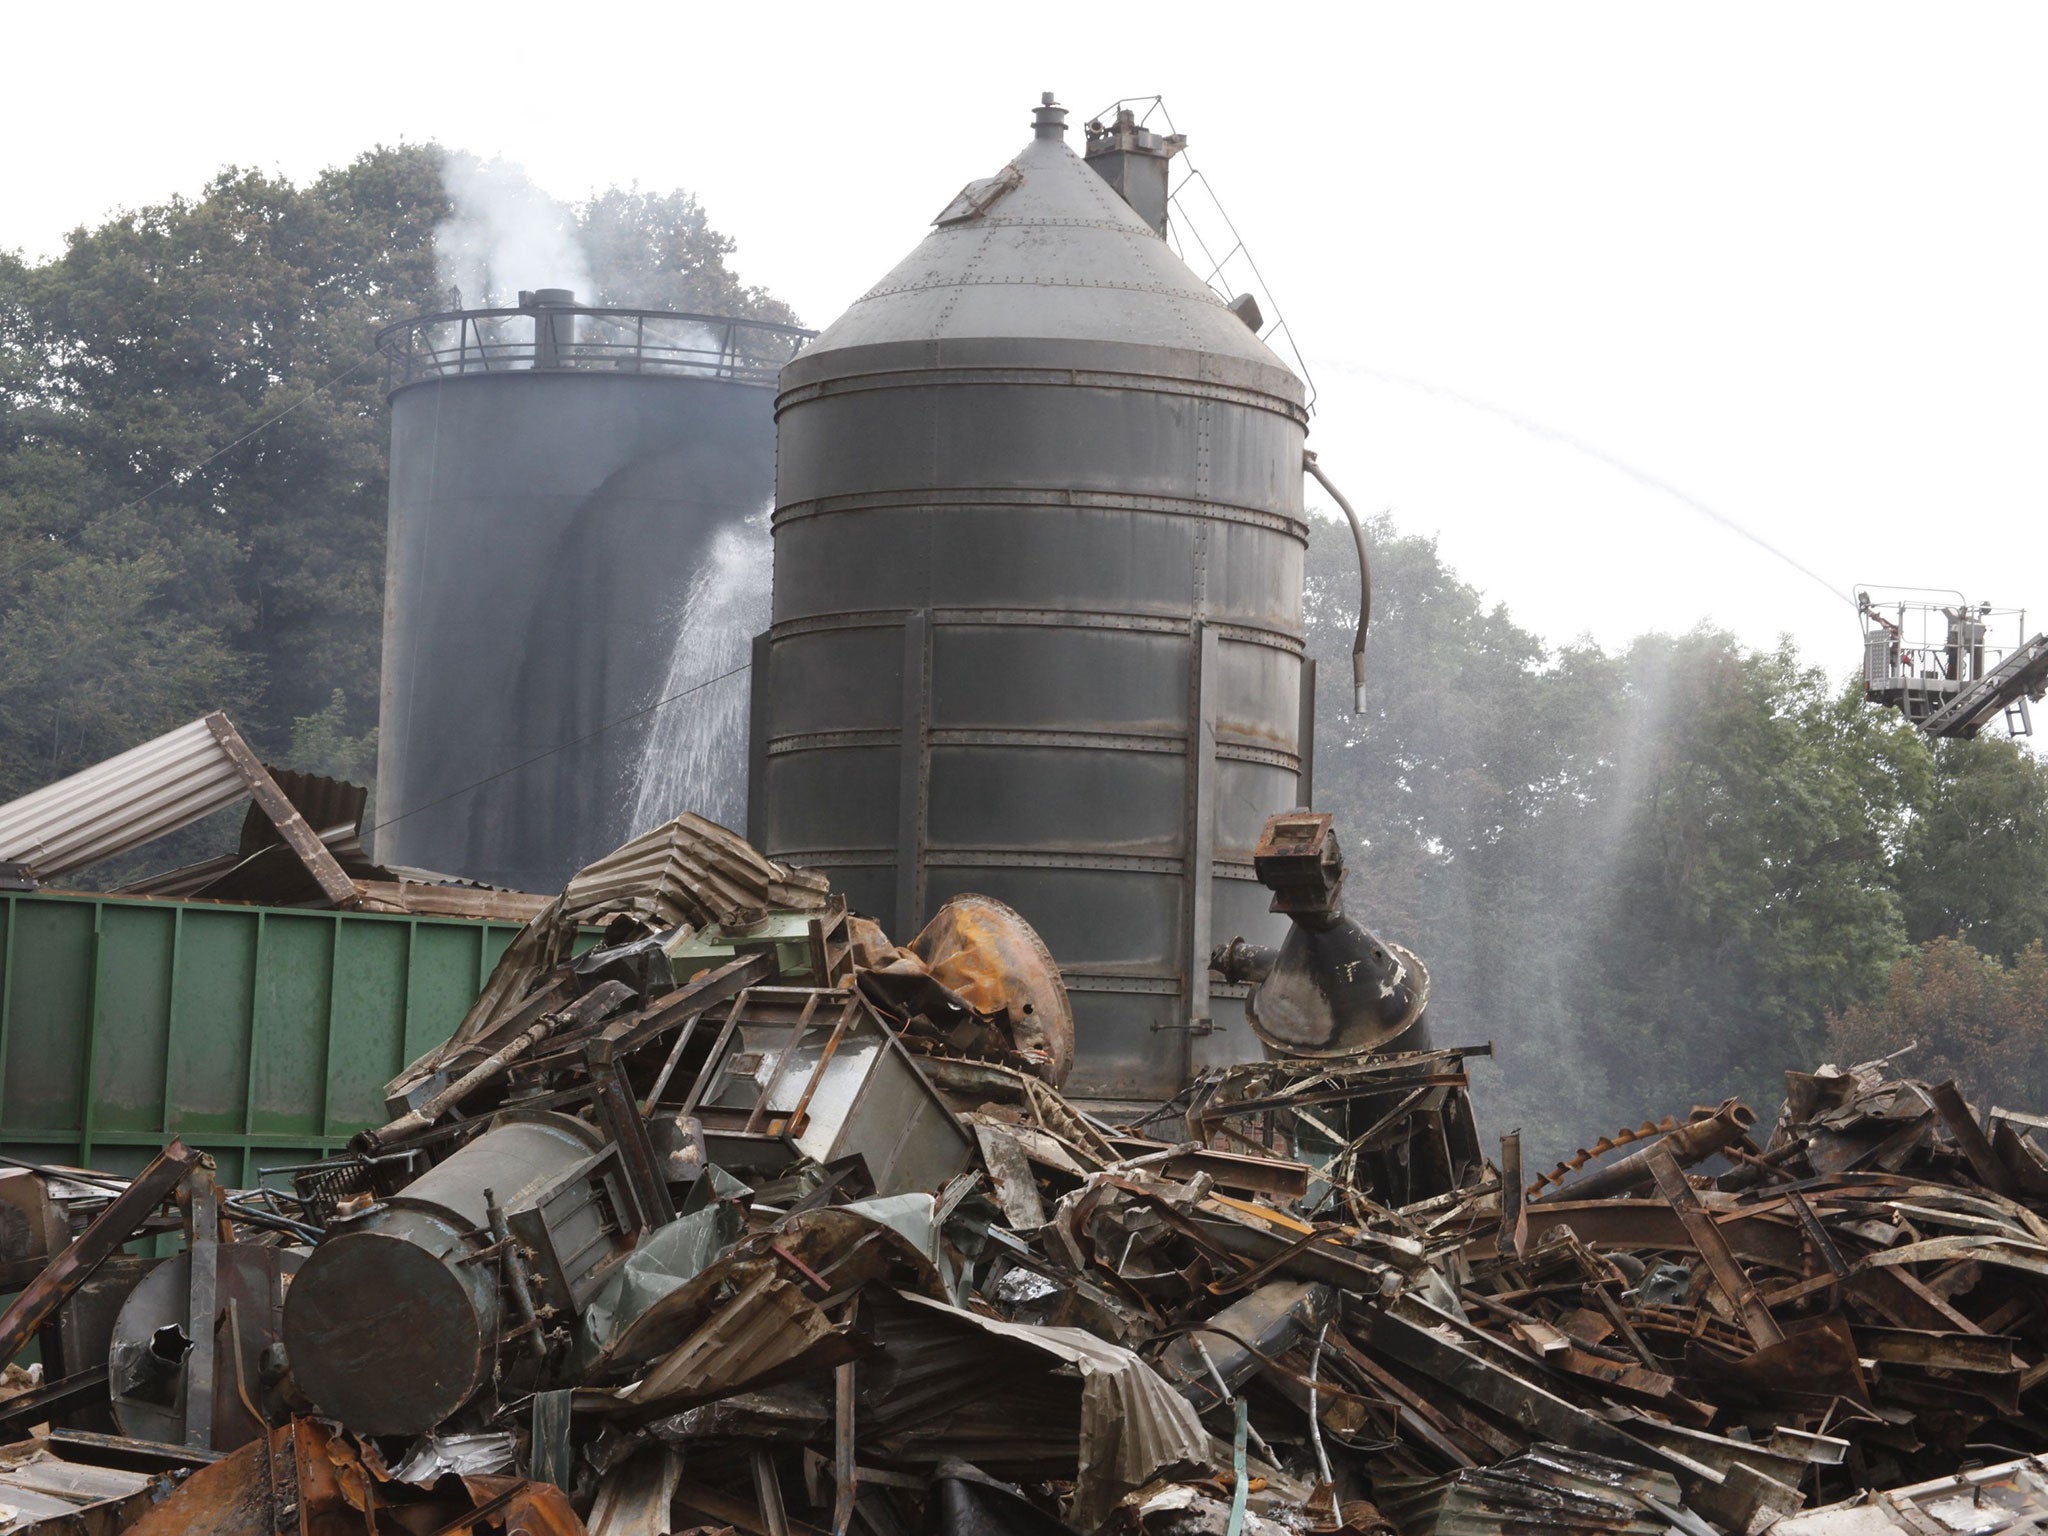 The aftermath following the huge explosion at the Wood Treatment Limited plant in the village of Bosley, Cheshire